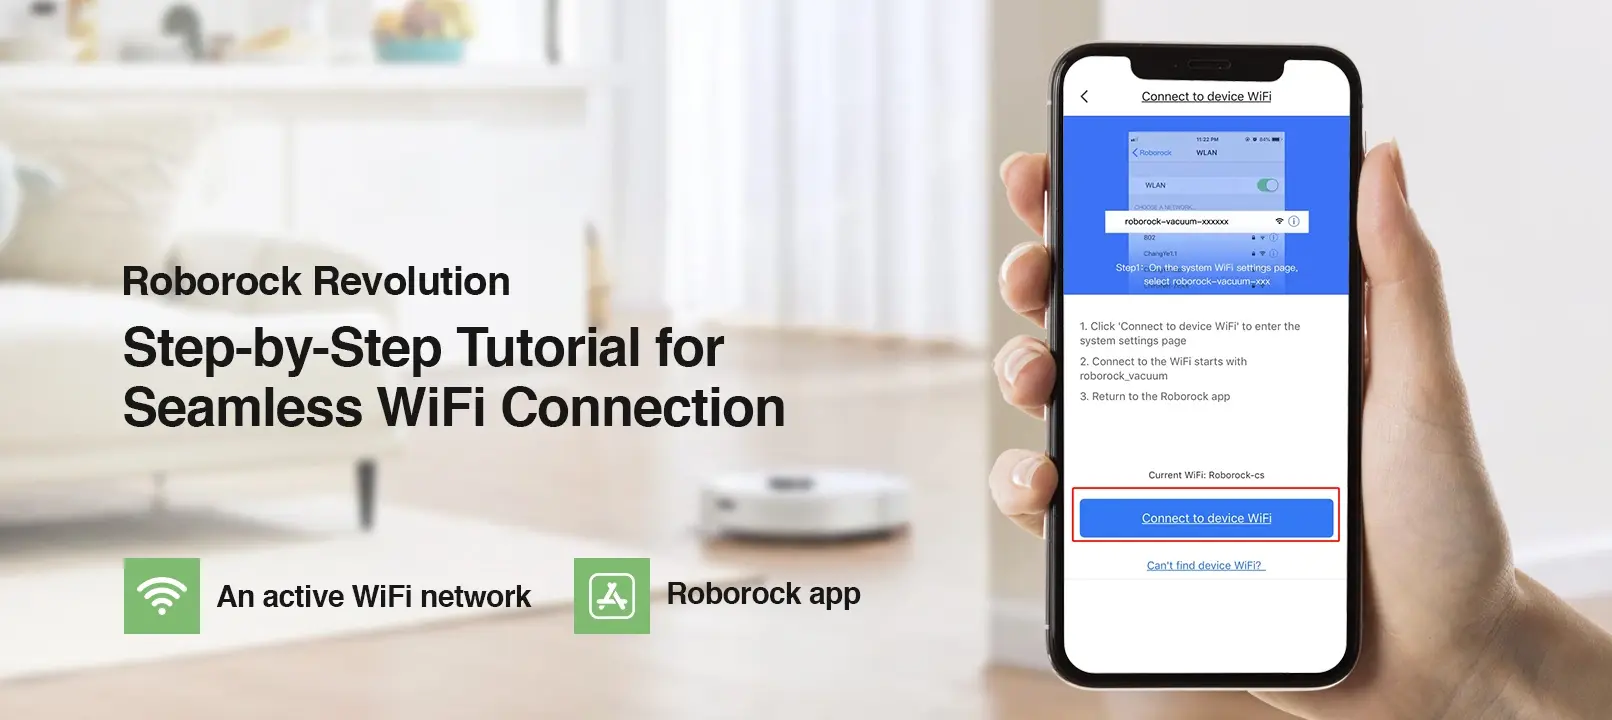 How to Connect Roborock to WiFi